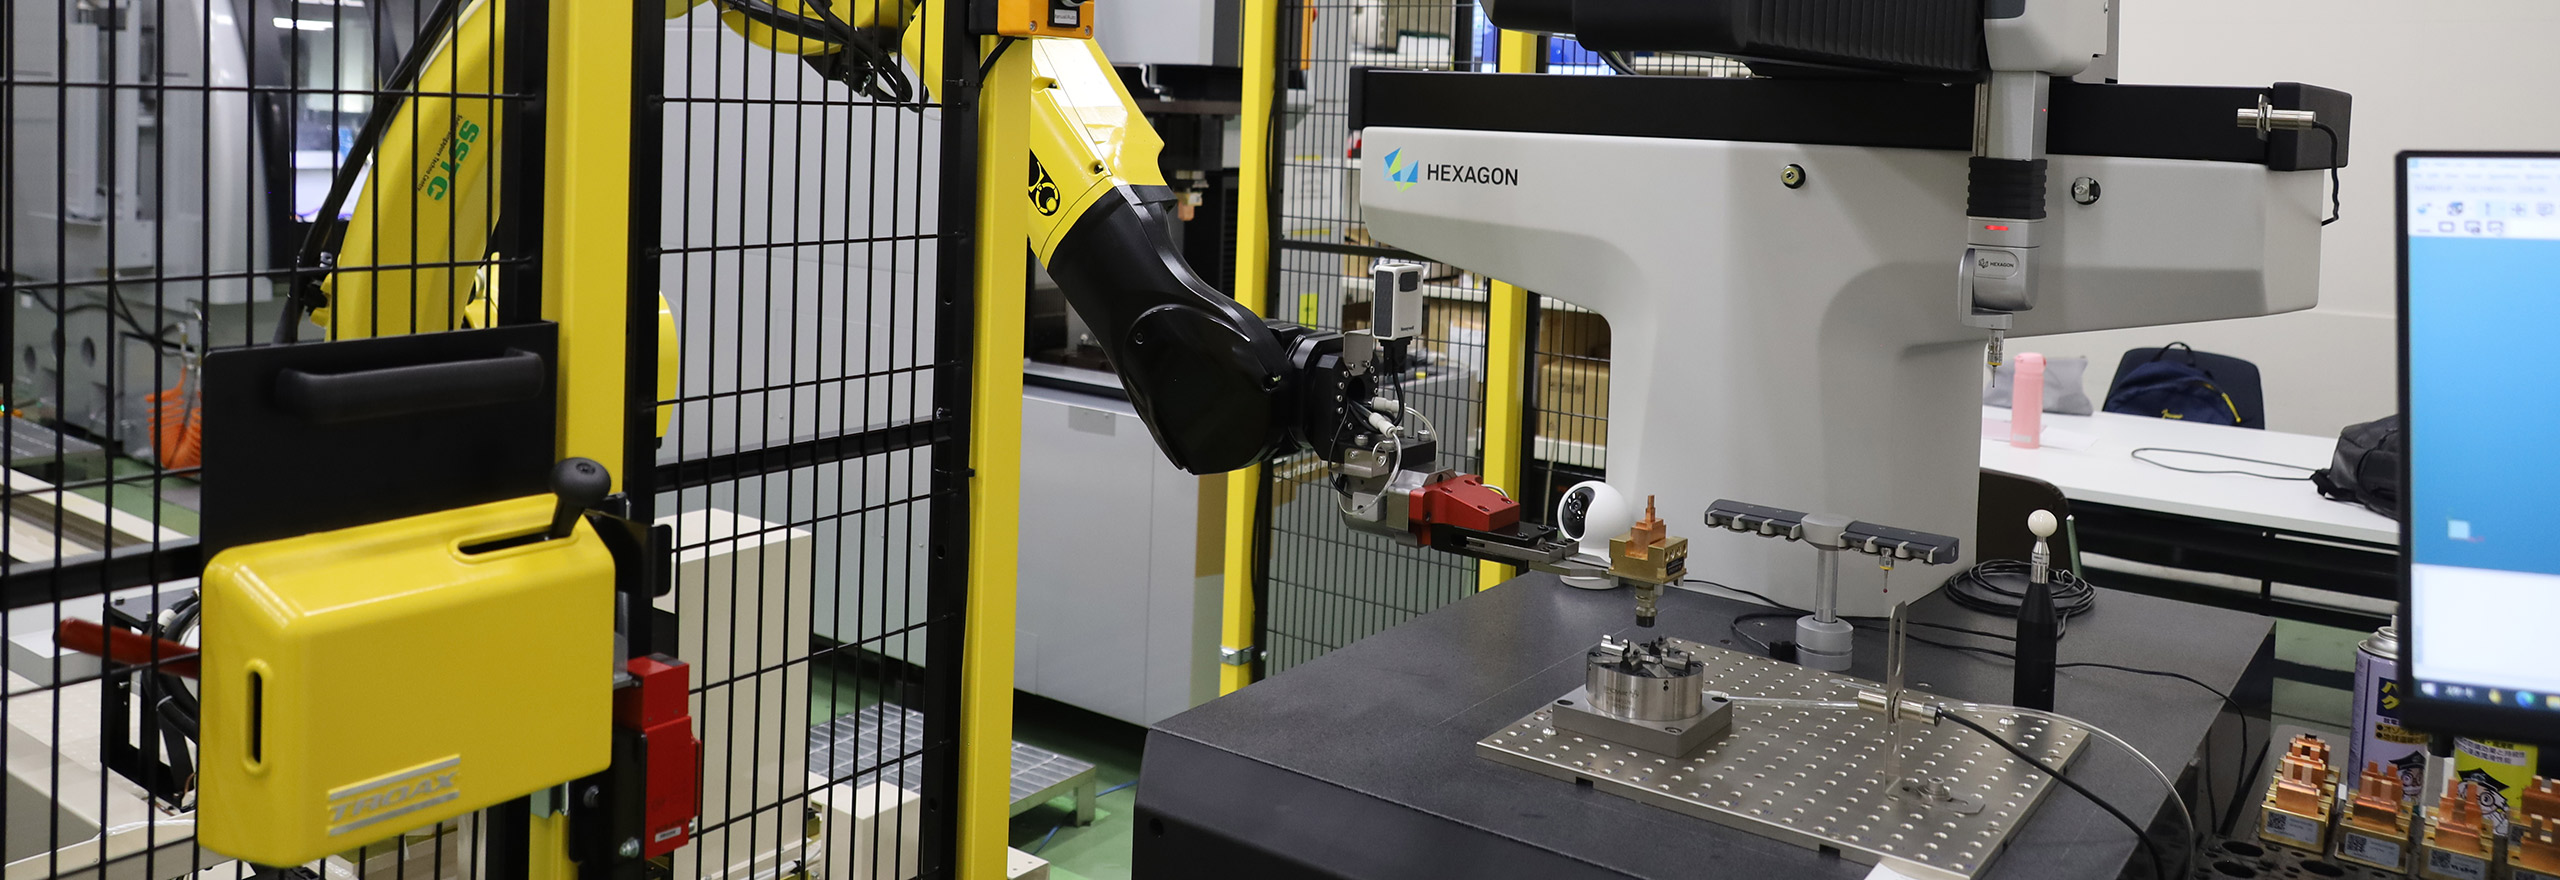 Automation and smarter EDM manufacturing enabled by shop-floor metrology solutions